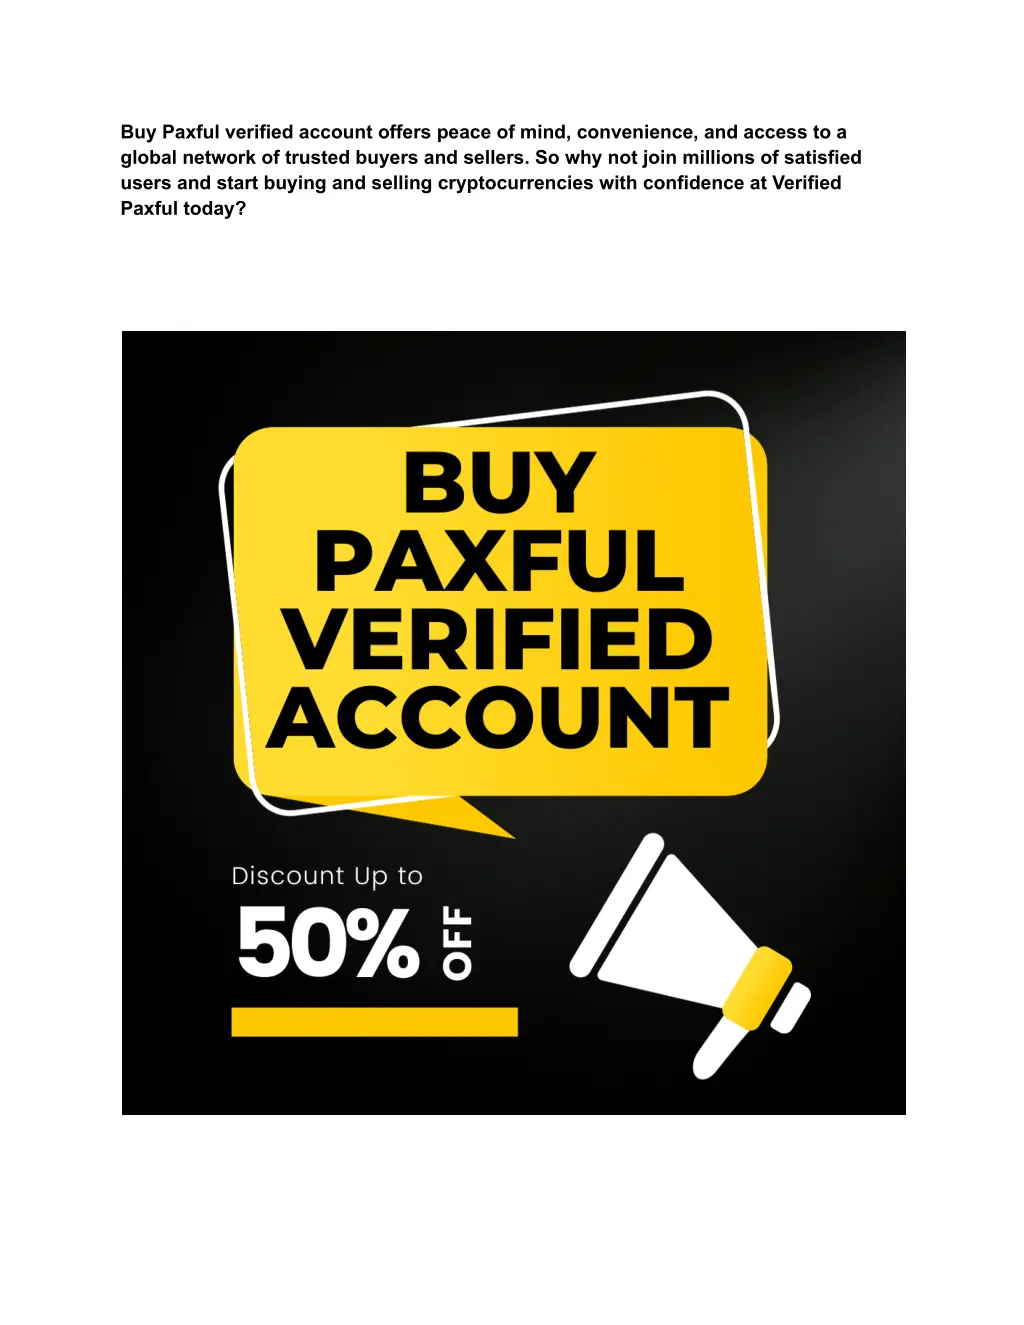 buy paxful verified account offers peace of mind